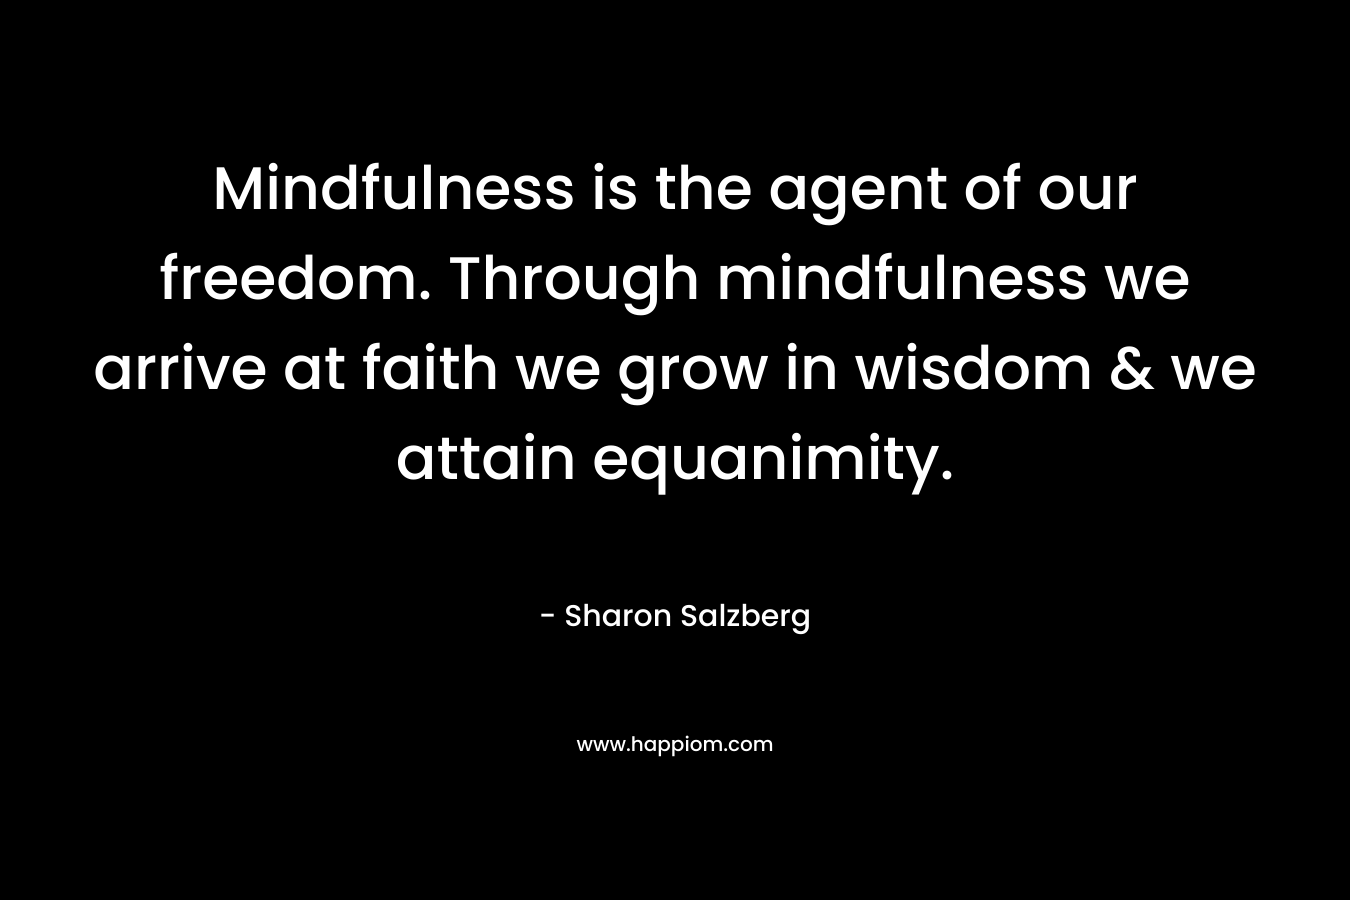 Mindfulness is the agent of our freedom. Through mindfulness we arrive at faith we grow in wisdom & we attain equanimity. – Sharon Salzberg